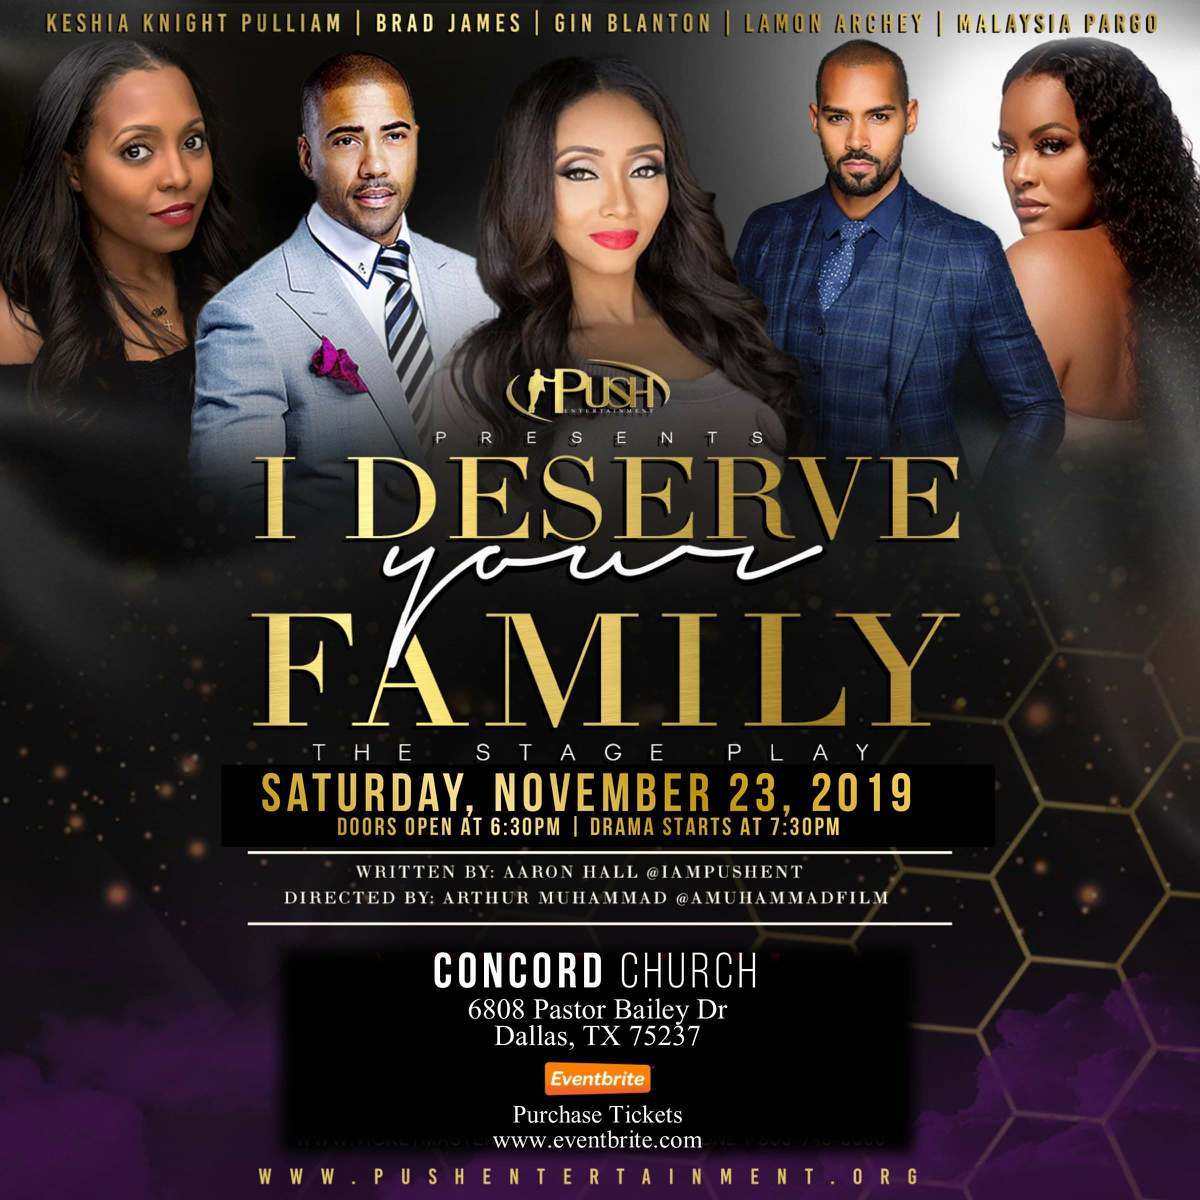 The Anticipated Production and Stage Play "I Deserve Your Family" Premieres on November 23, 2019 in Dallas